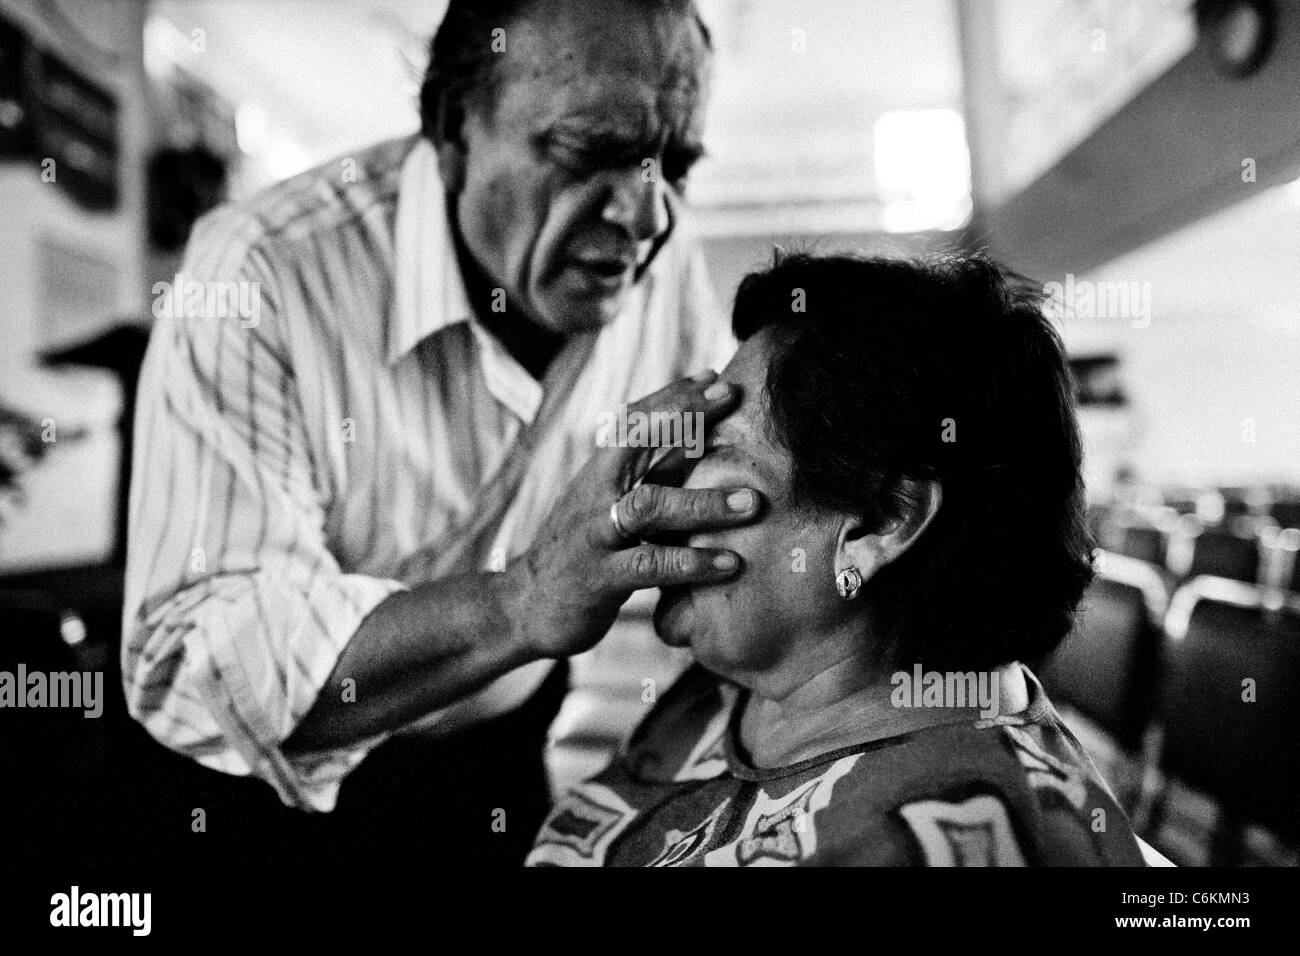 Pastor Hugo Alvarez performs the exorcism ritual on a follower of the Church of the Divine Saviour in Mexico City, Mexico. Stock Photo